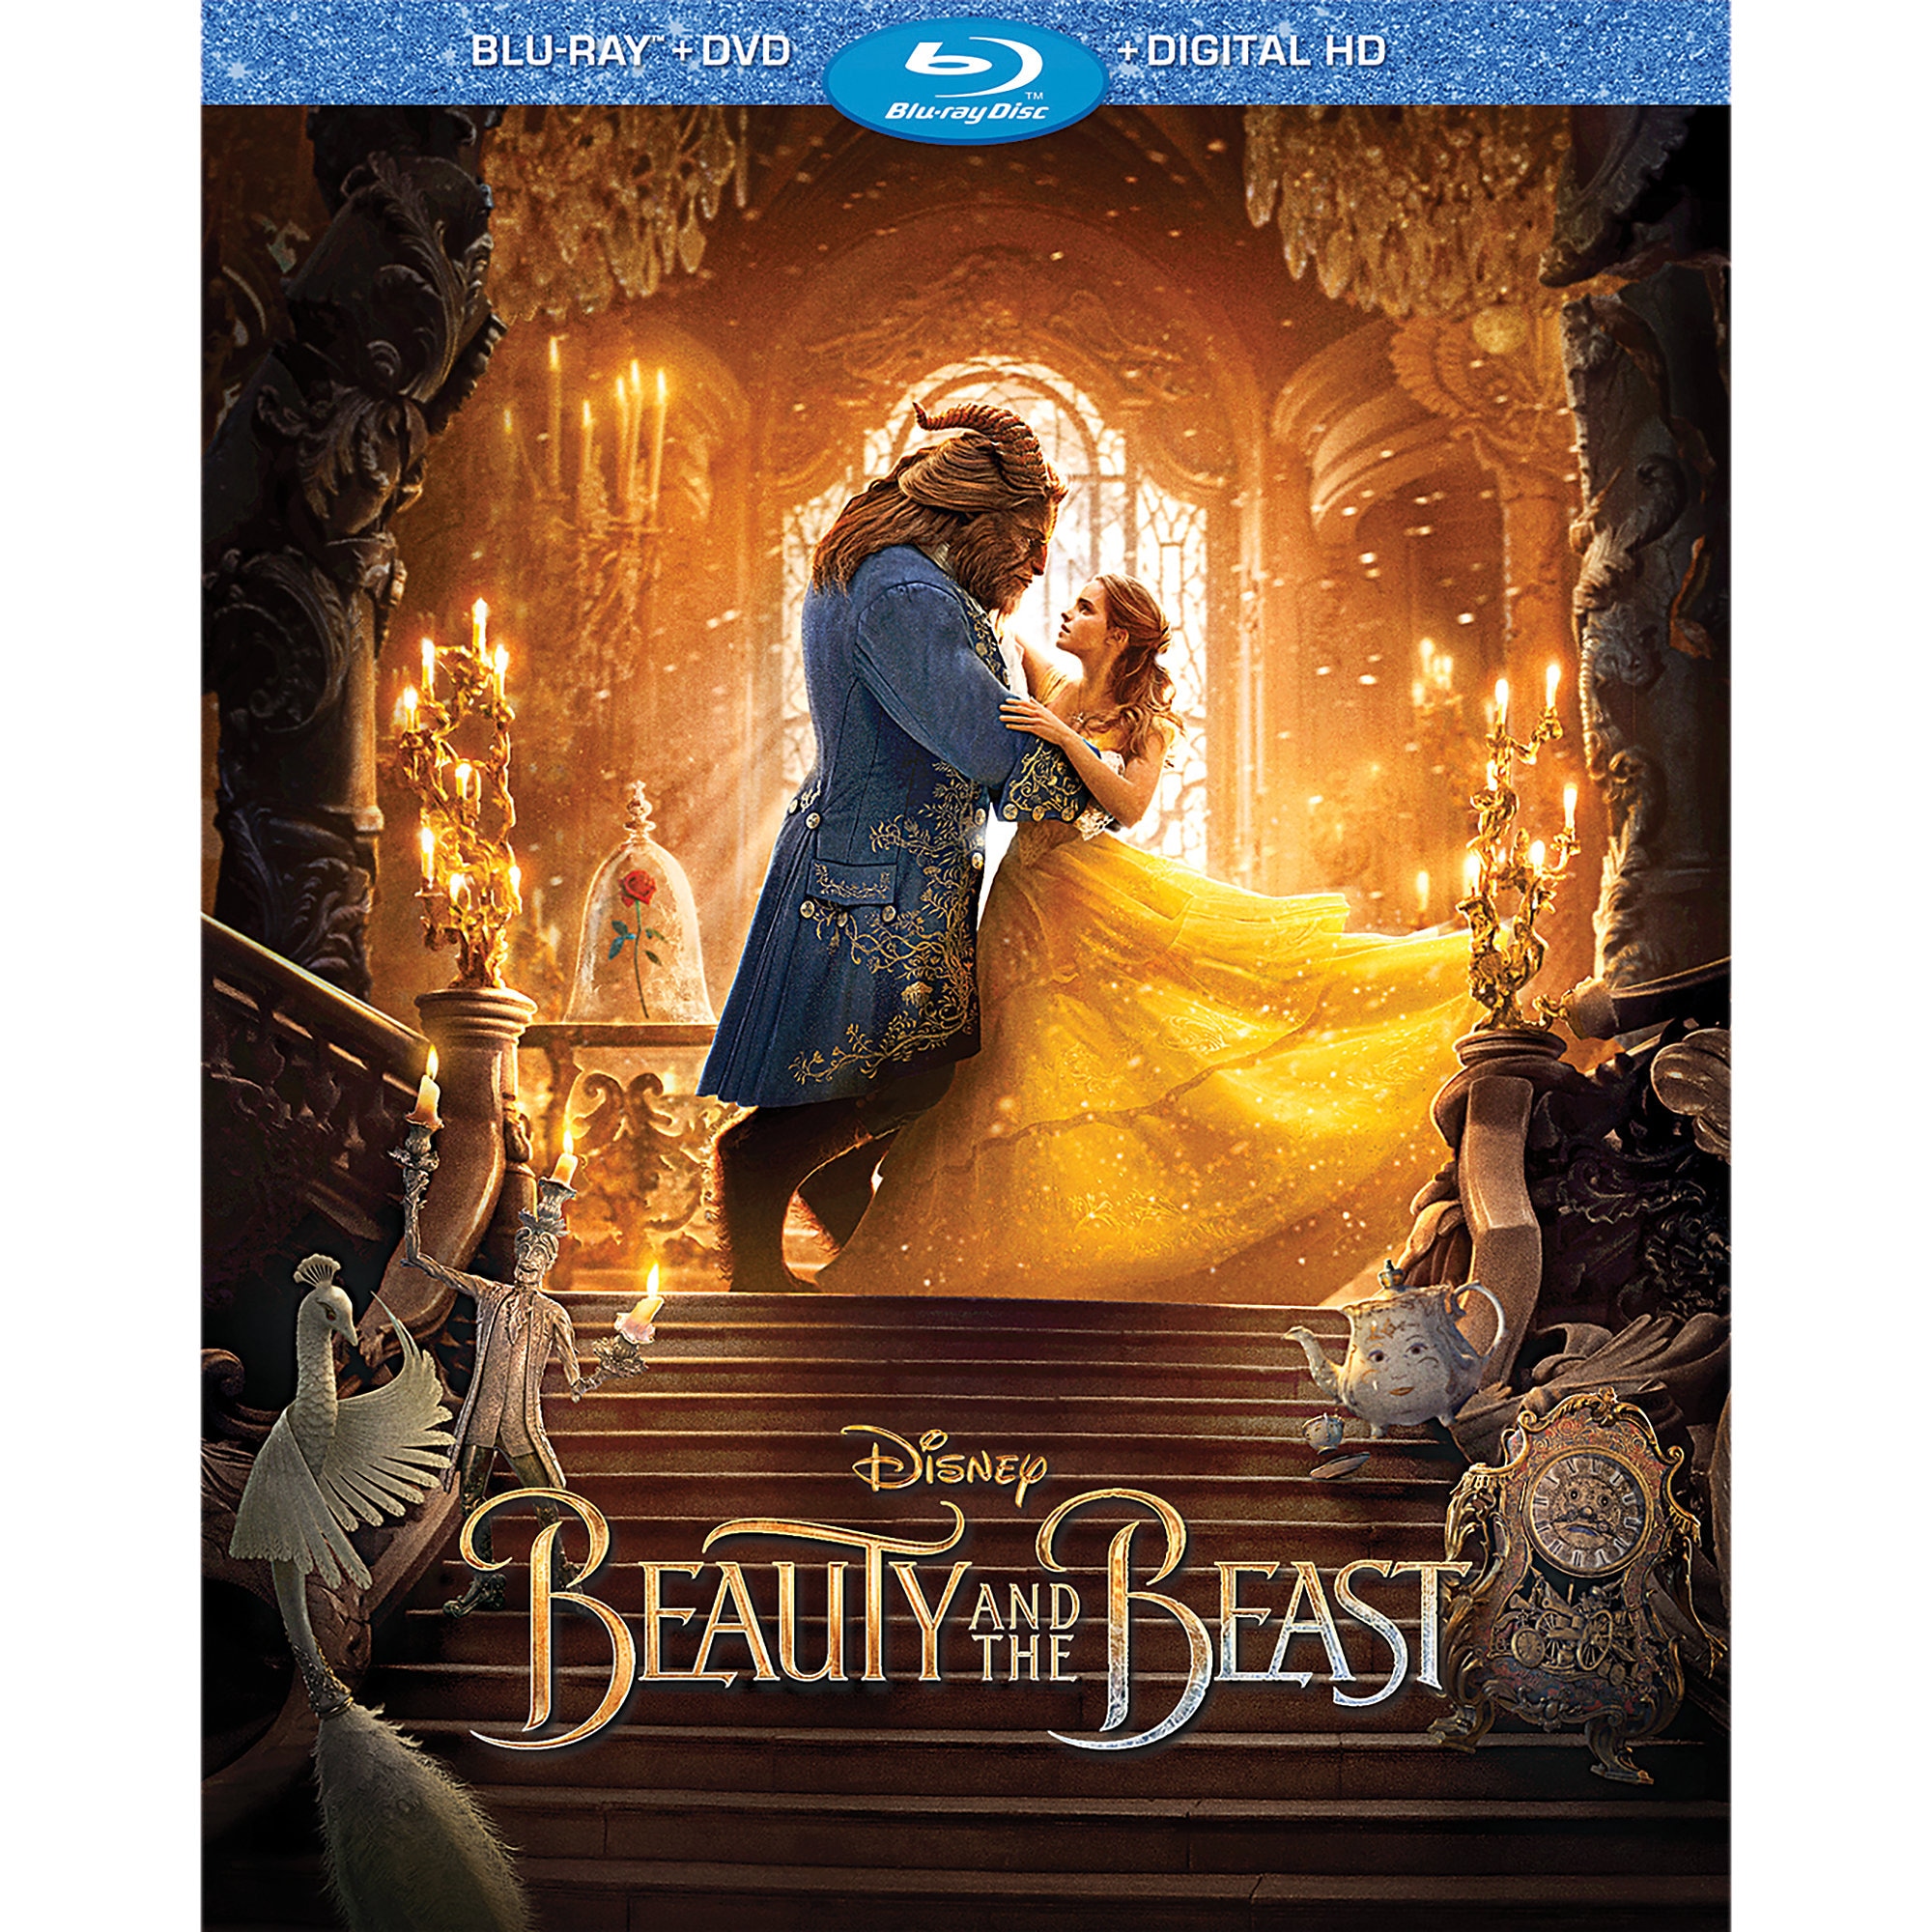 Beauty and the beast full movie